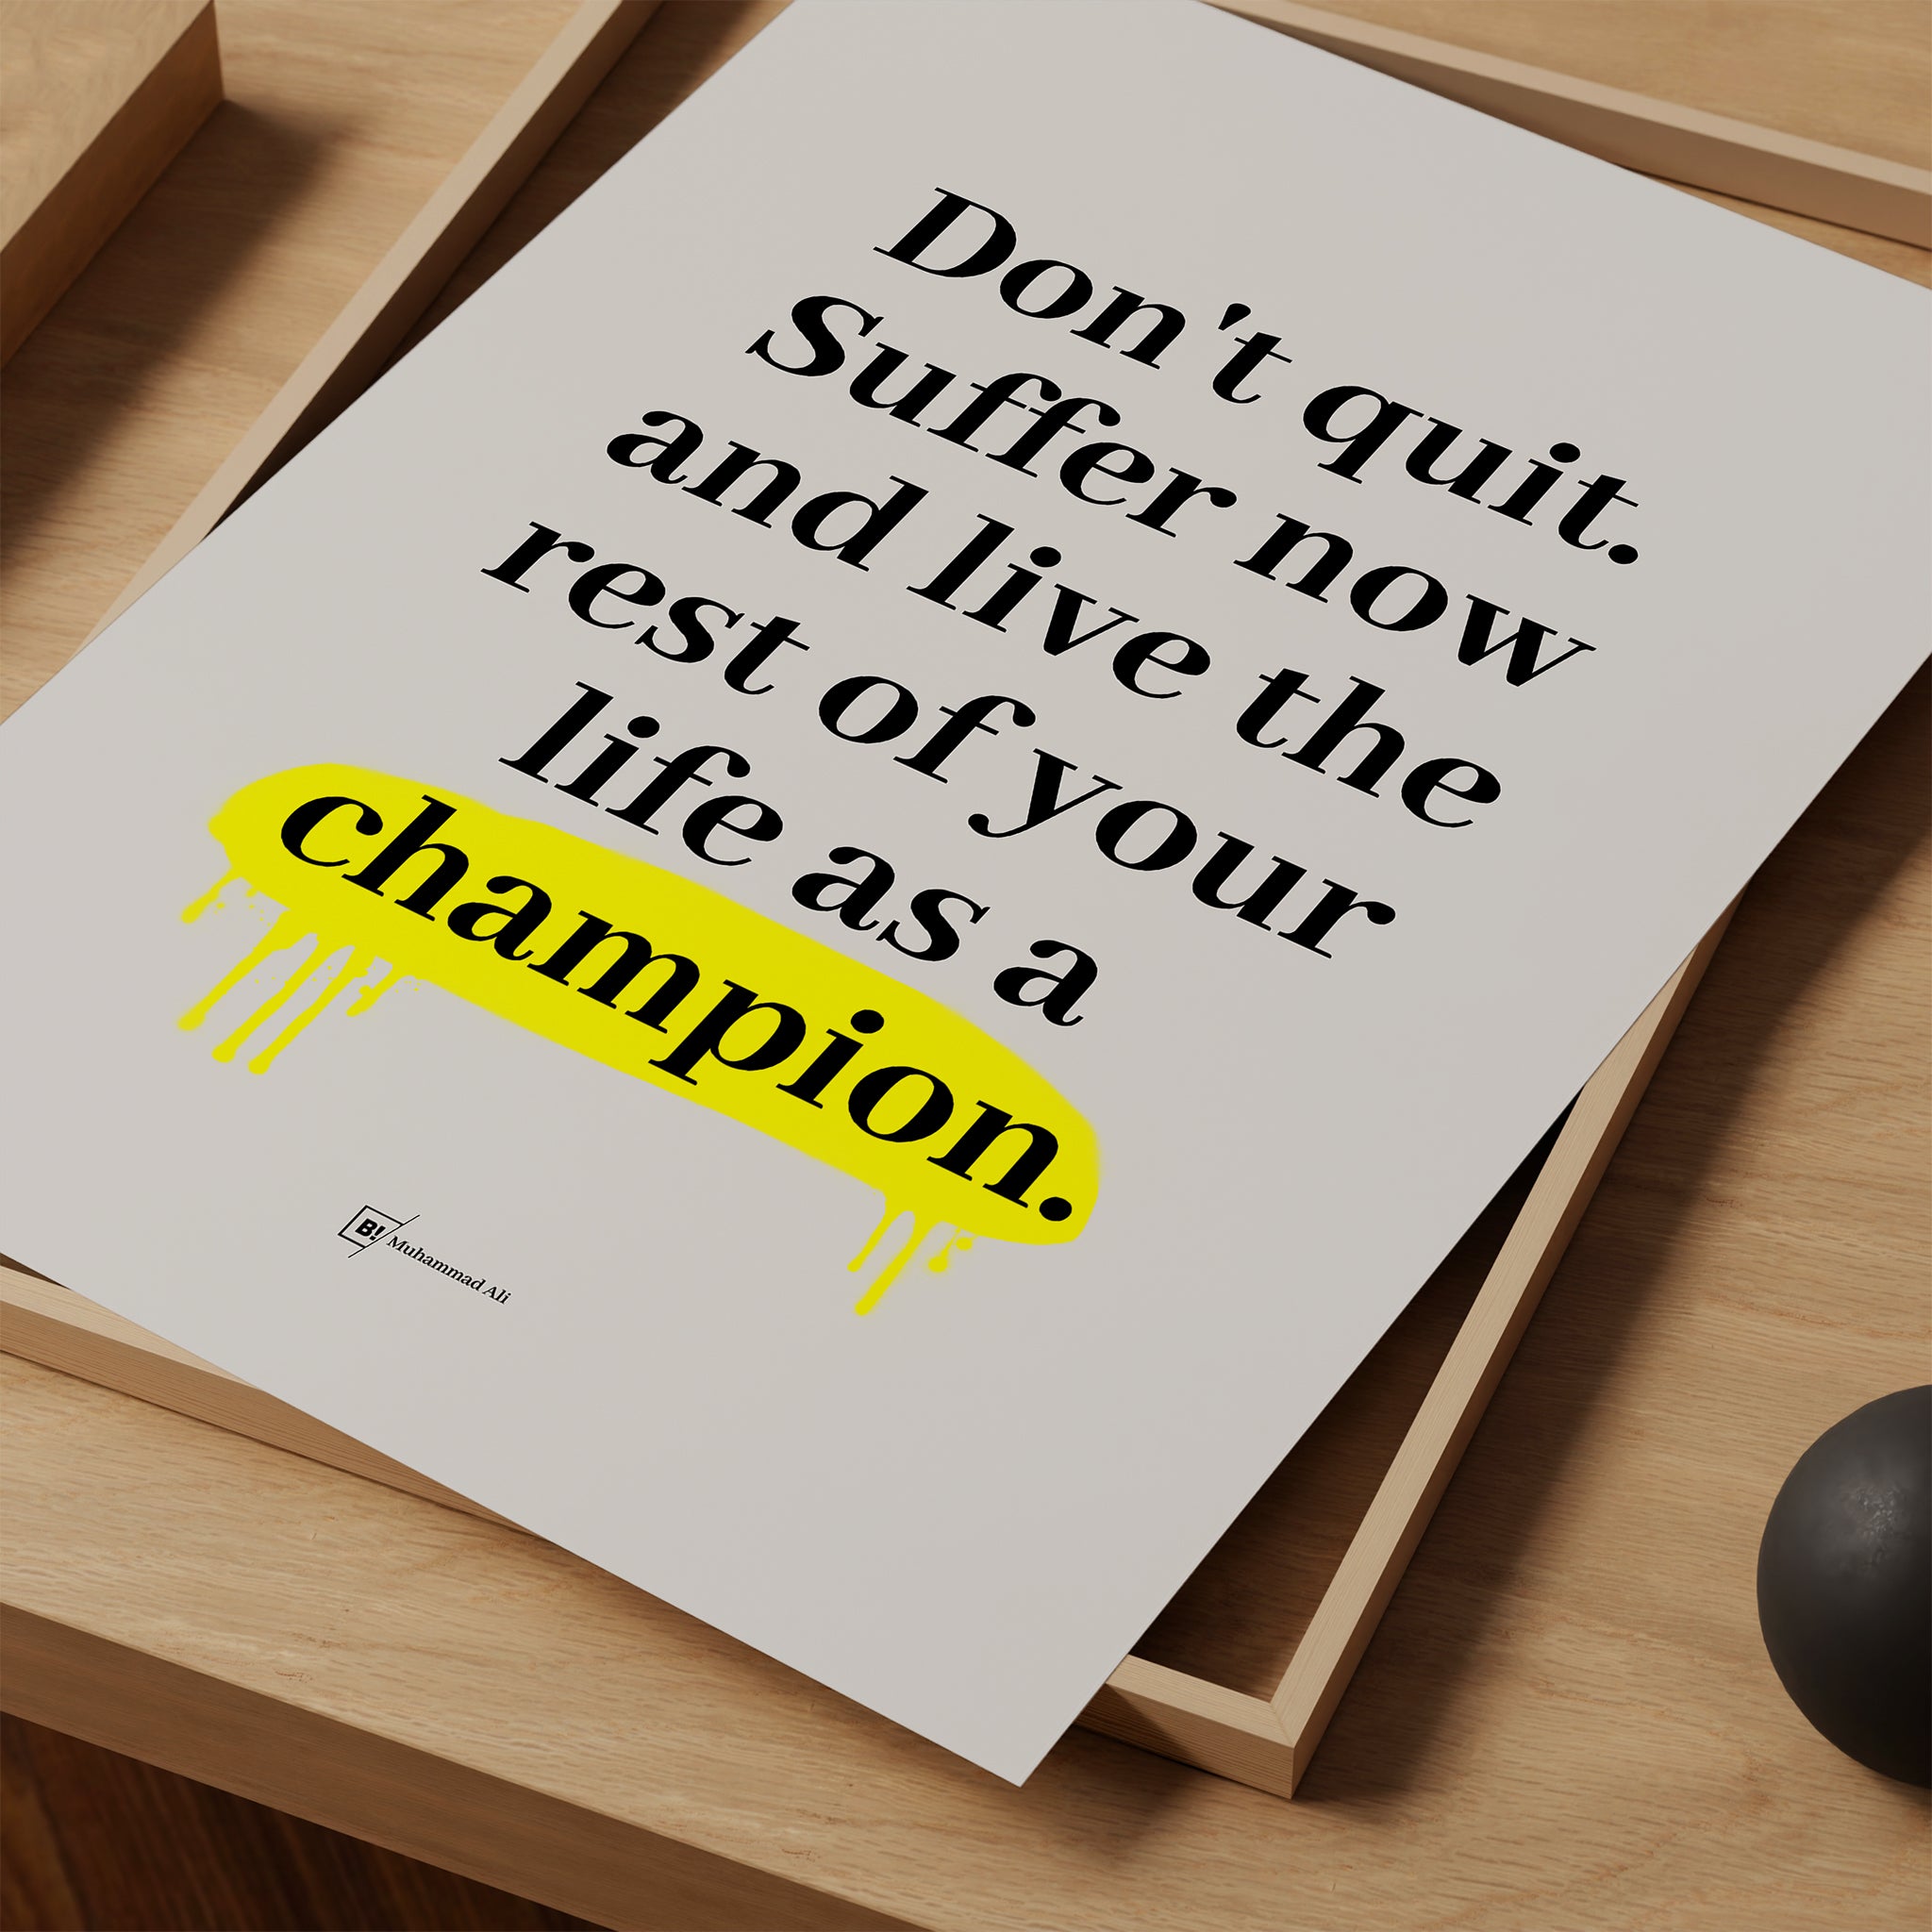 Be inspired by Muhammad Ali's famous "Don't quit. Suffer now and live the rest of your life as a champion" quote art print. This artwork was printed using giclée on archival acid-free paper and is presented as a print close-up that captures its timeless beauty in every detail.